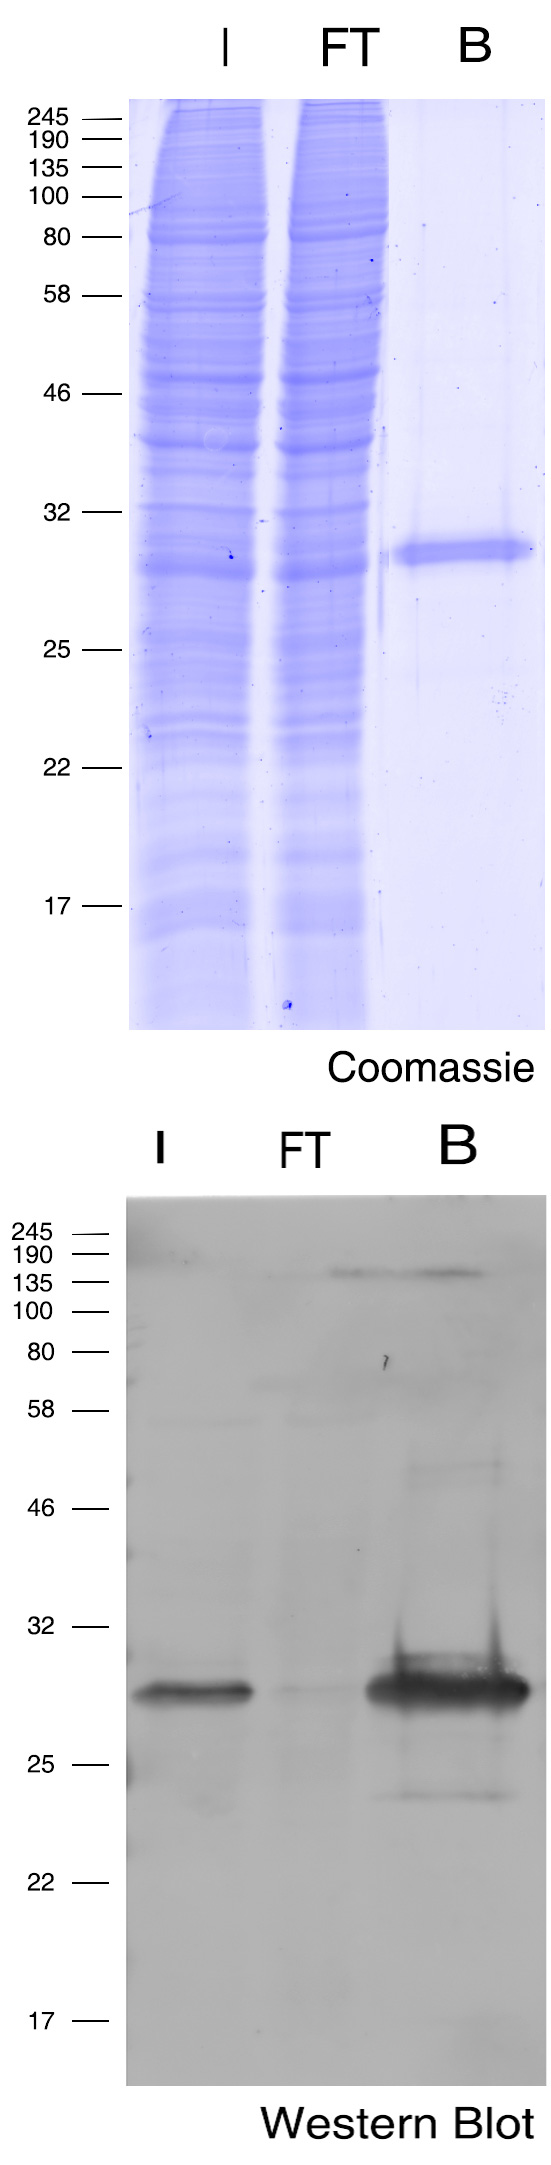 TurboGFP-Trap Magnetic Agarose for pull-down of TurboGFP fusion proteins: Coomassie and Western Blot Input (I), non-bound (FT), and bound (B).